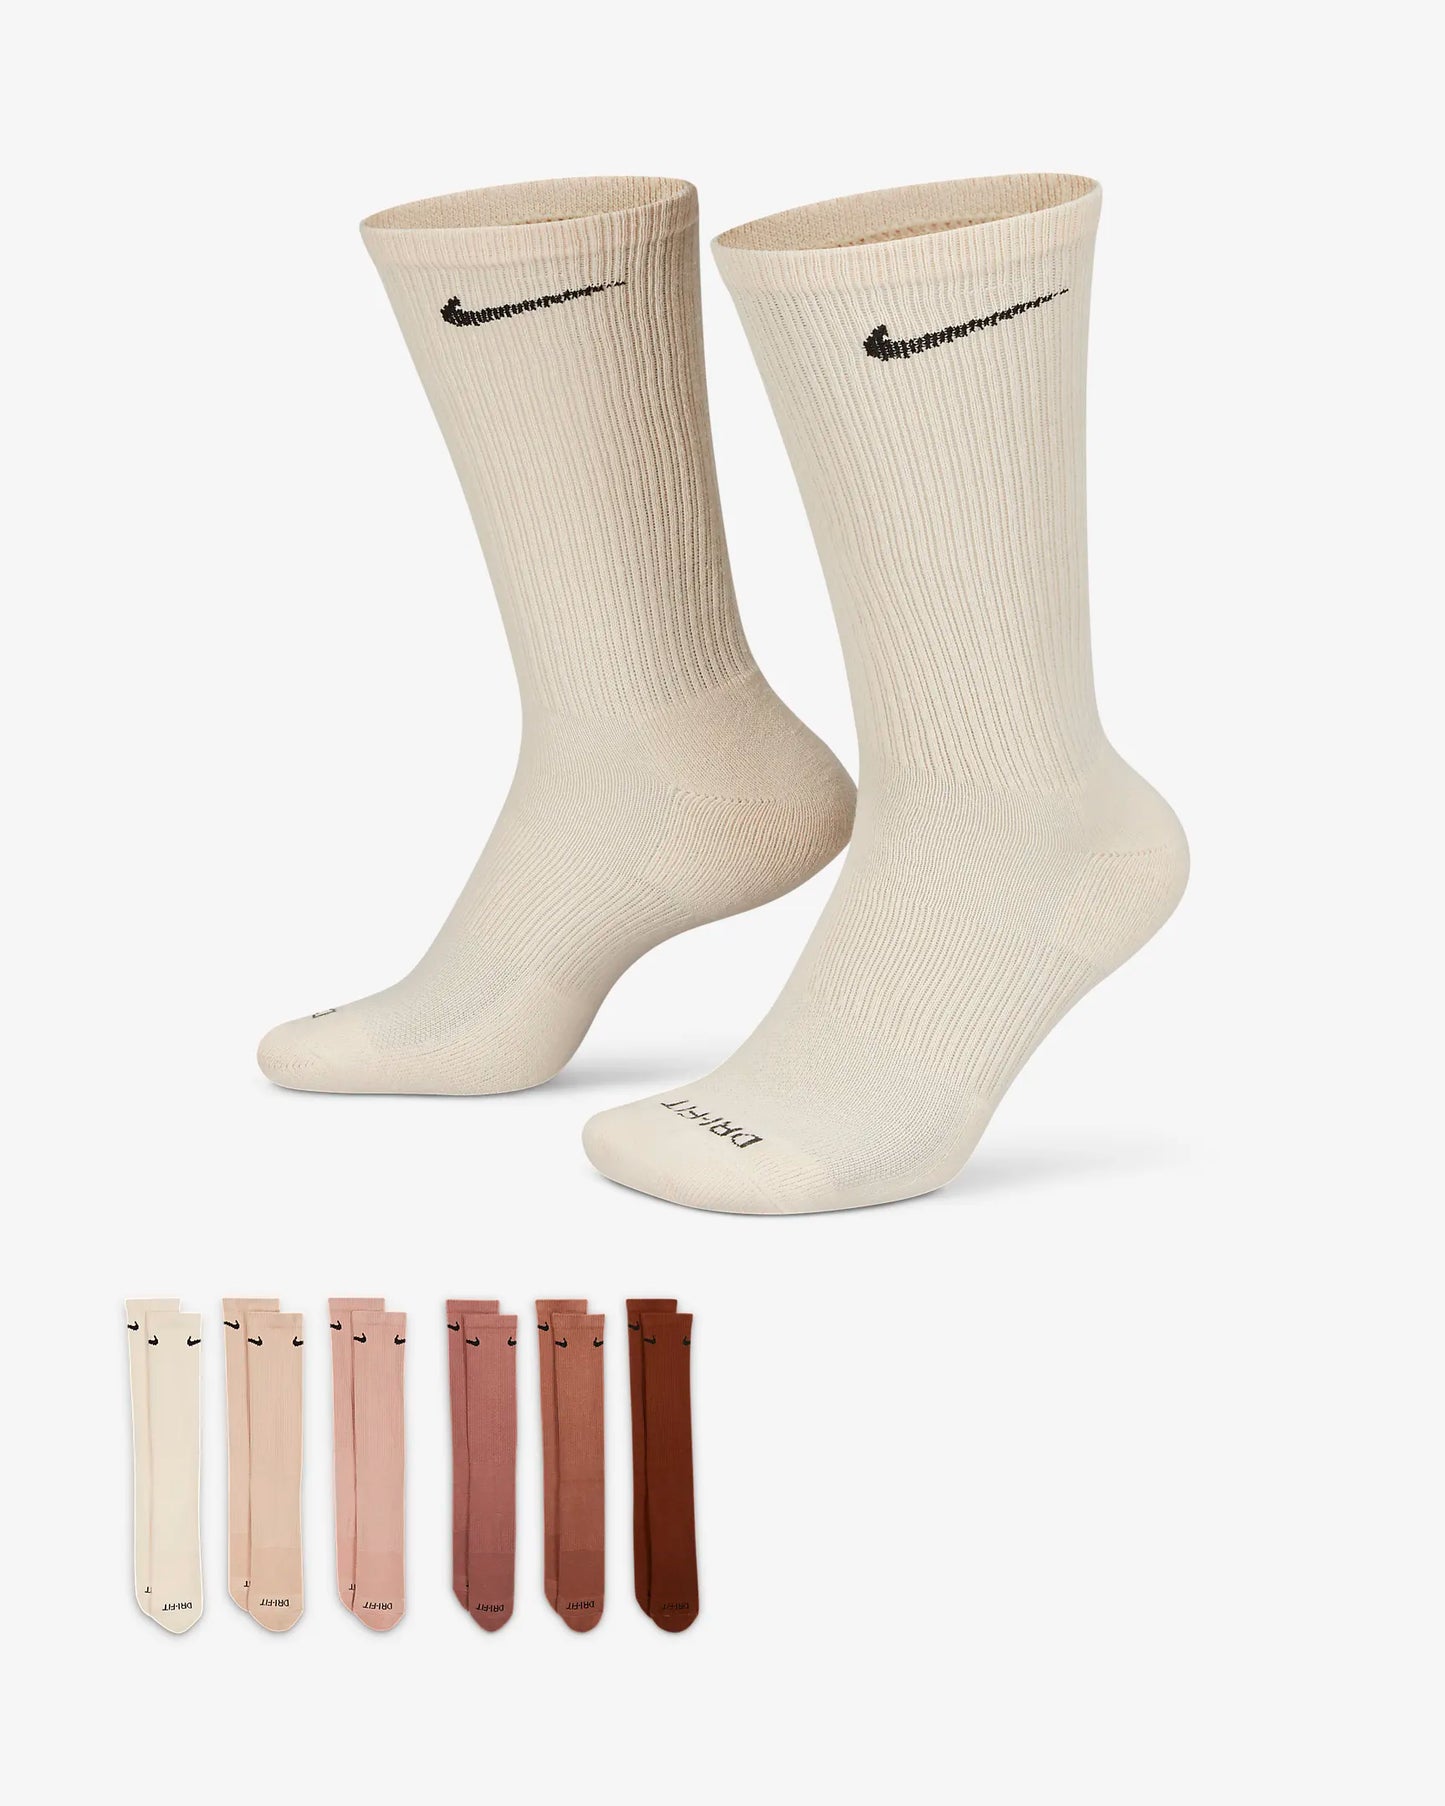 Nike Everyday Cushioned Crew Socks - Multi-Color (6 Pack)